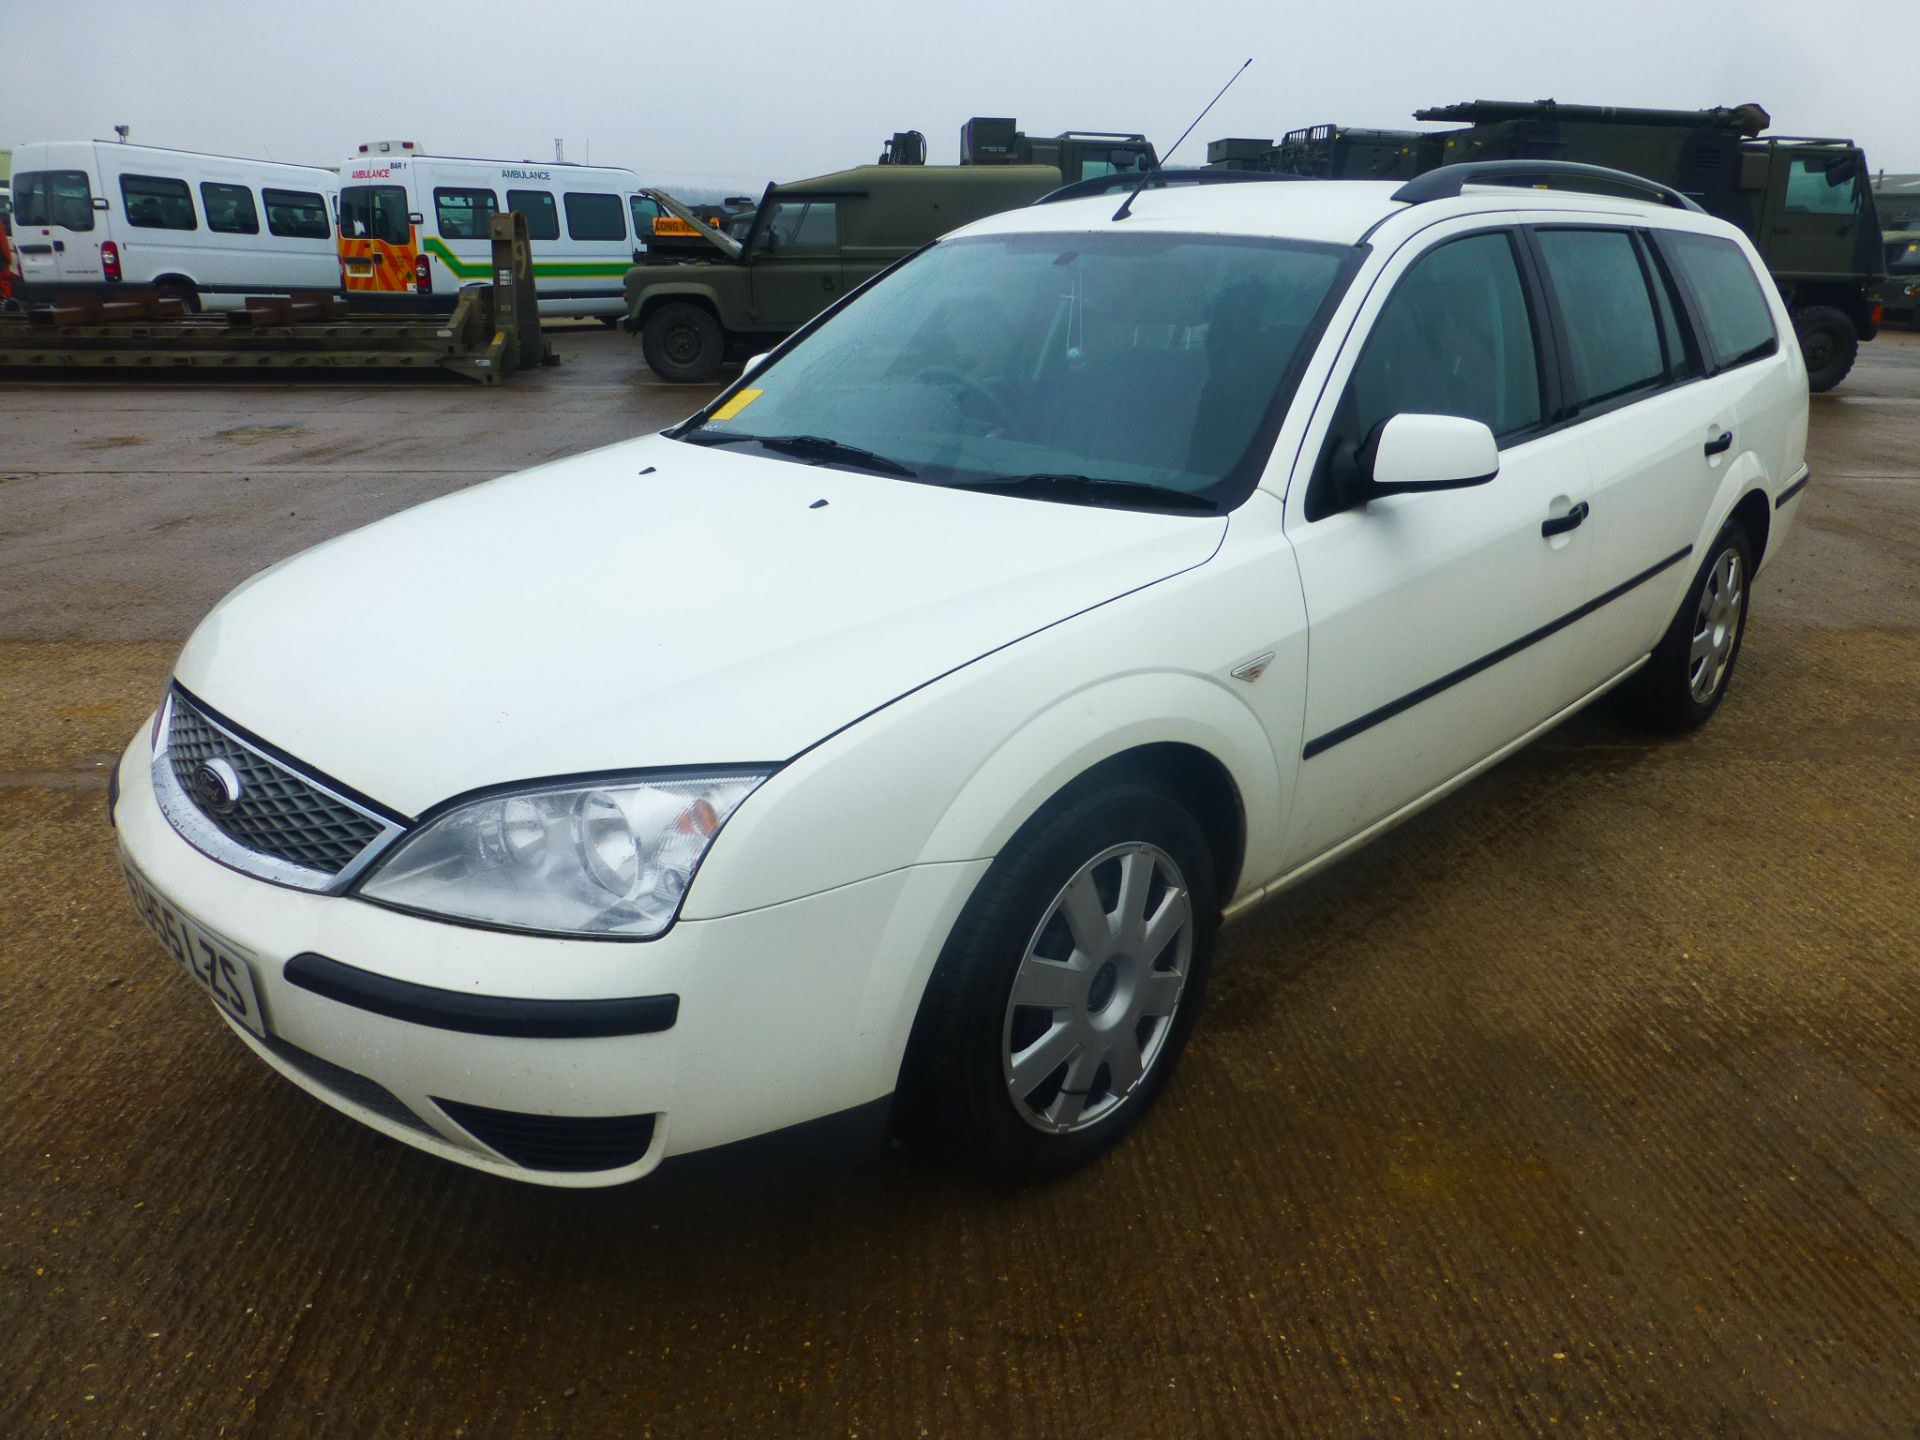 Ford Mondeo 2.0TDCi Estate - Image 4 of 16